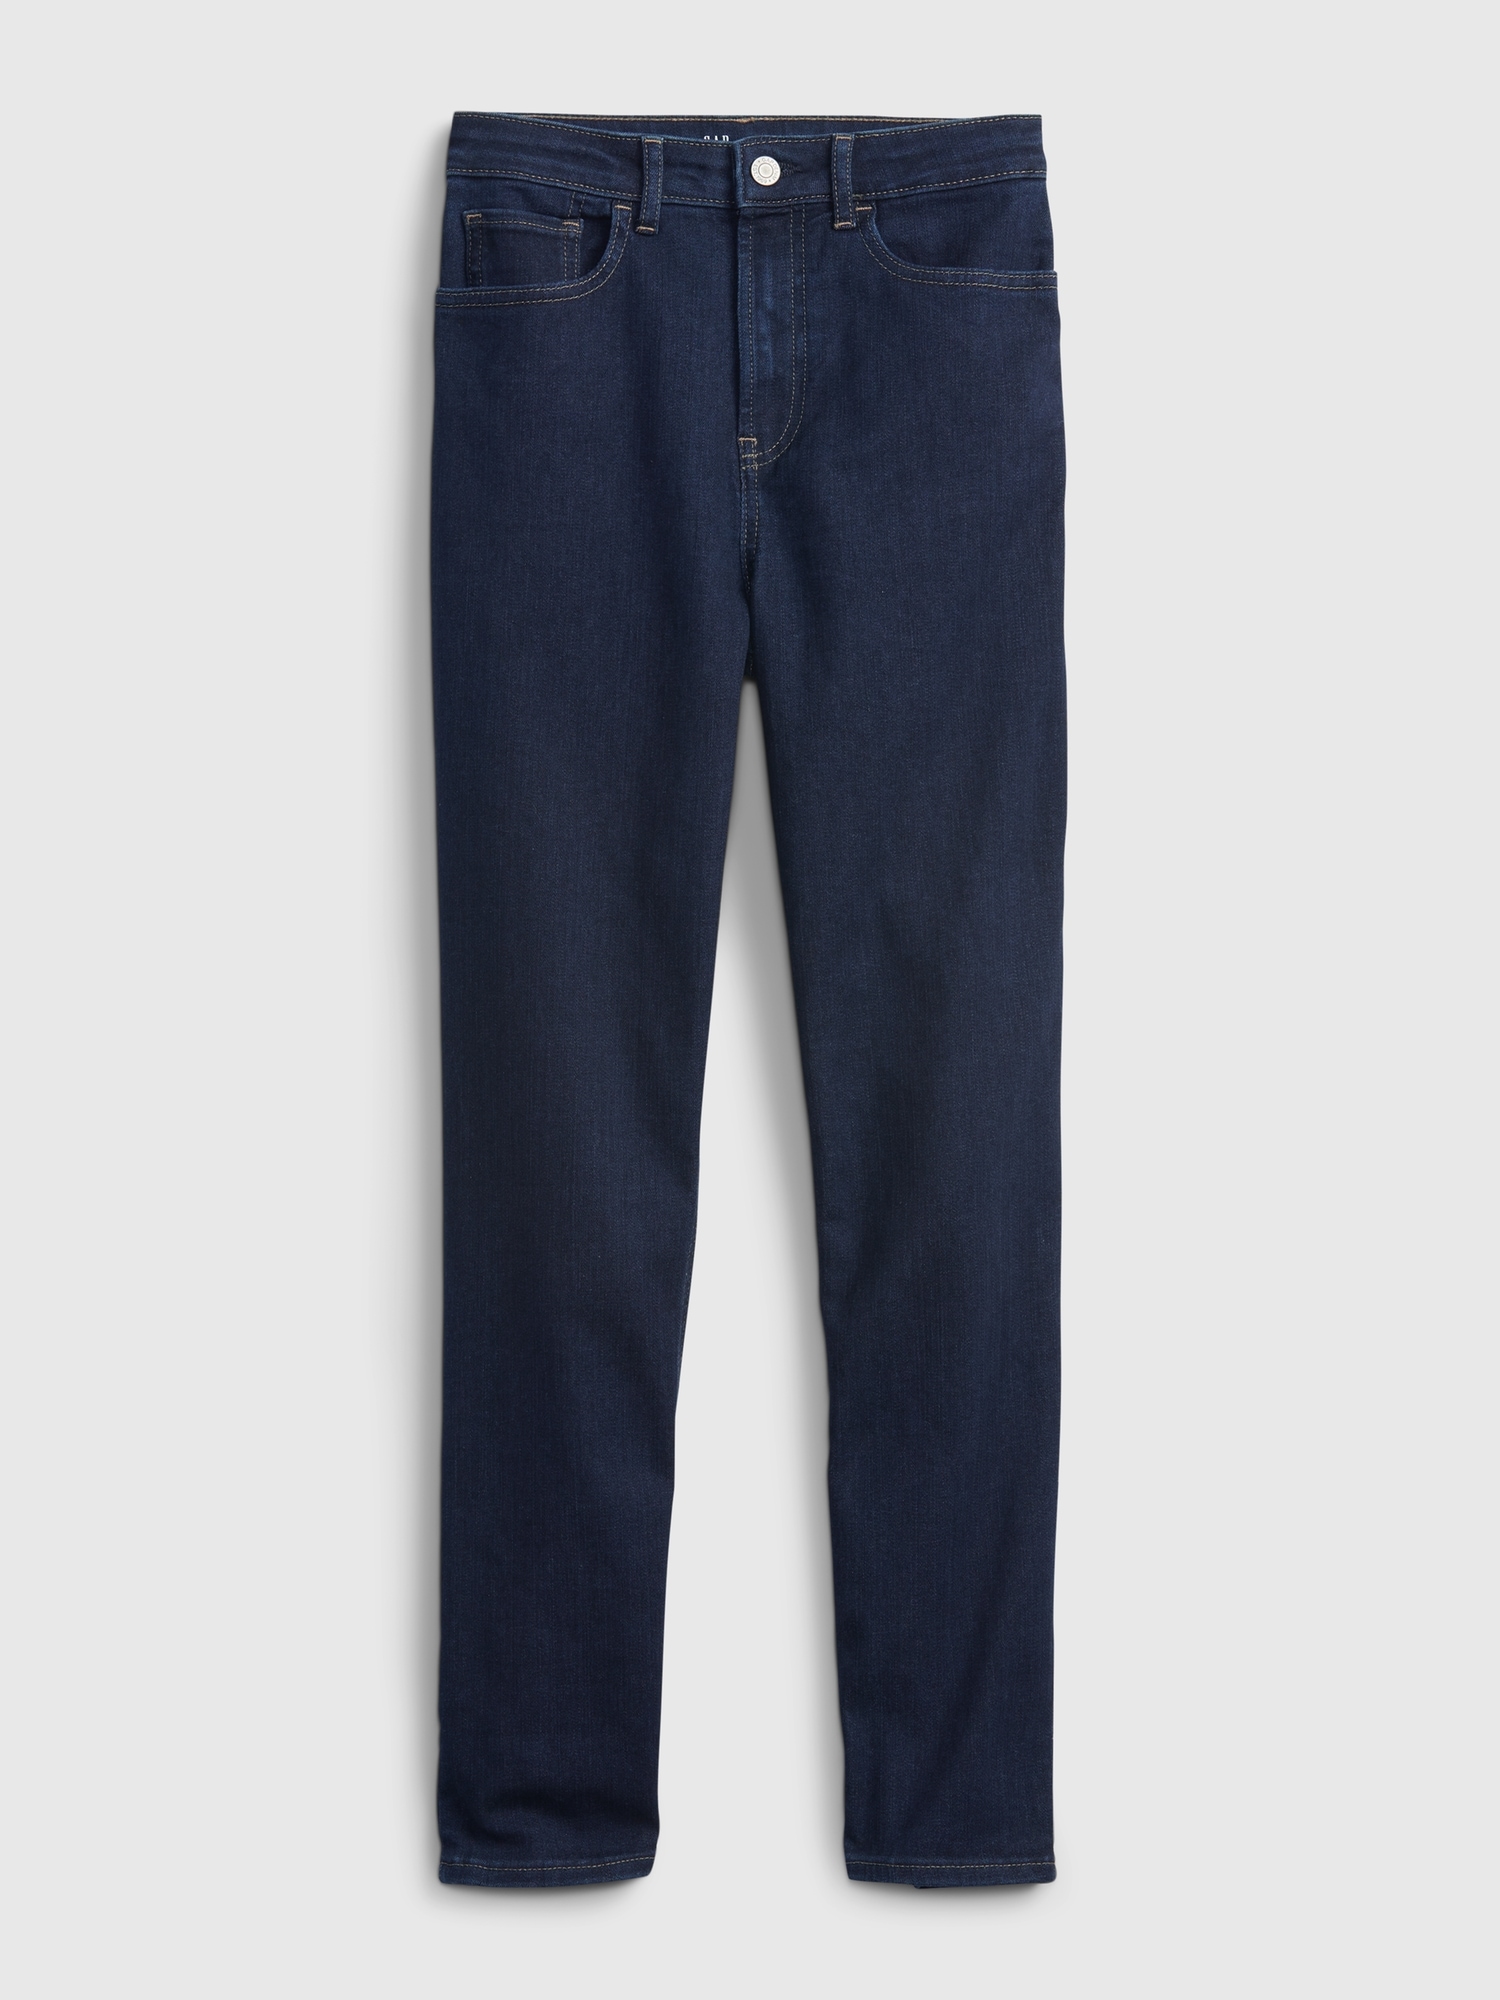 Teen Sky High Rise Skinny Ankle Jeans with Washwell ™ | Gap